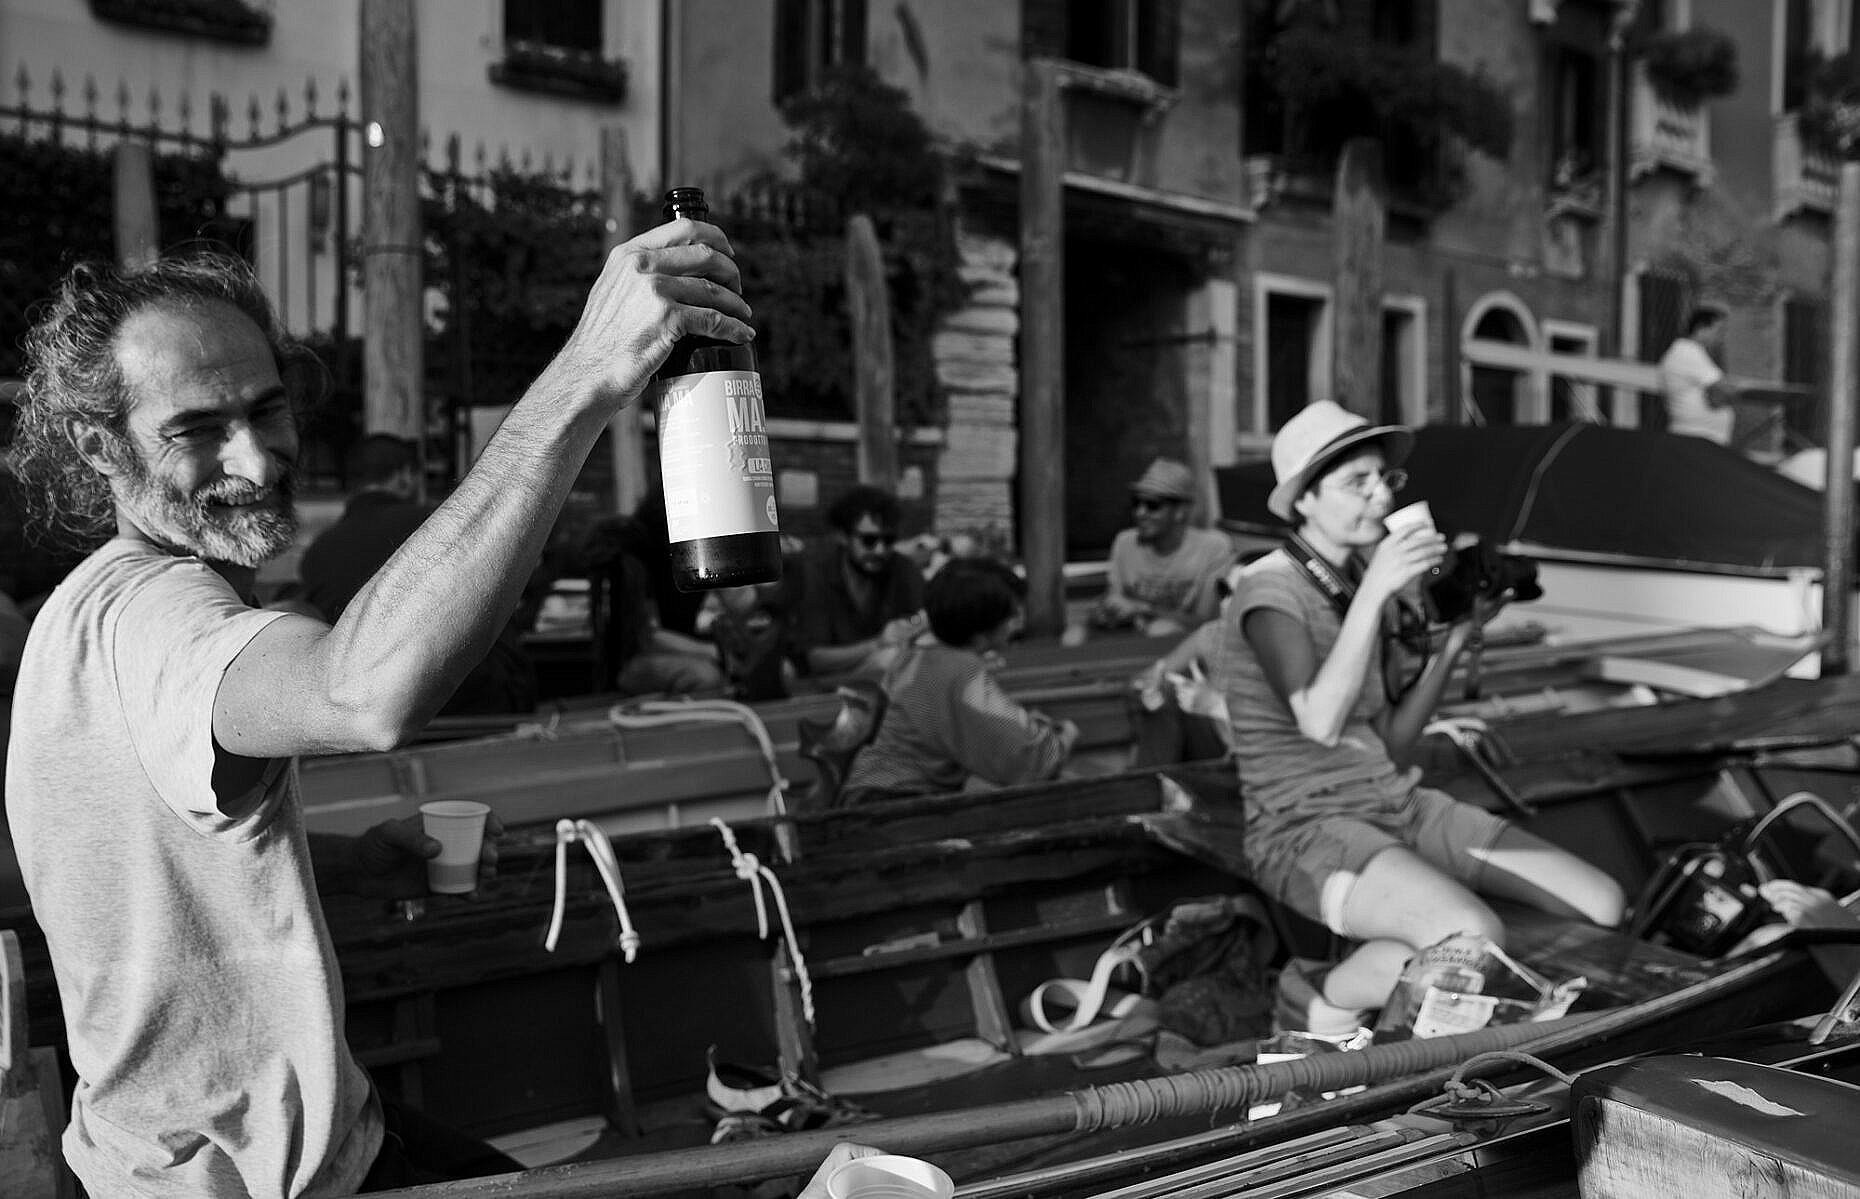 Cheers! while waiting for the last race of the Regata Storica 2018 on the Grand Canal.